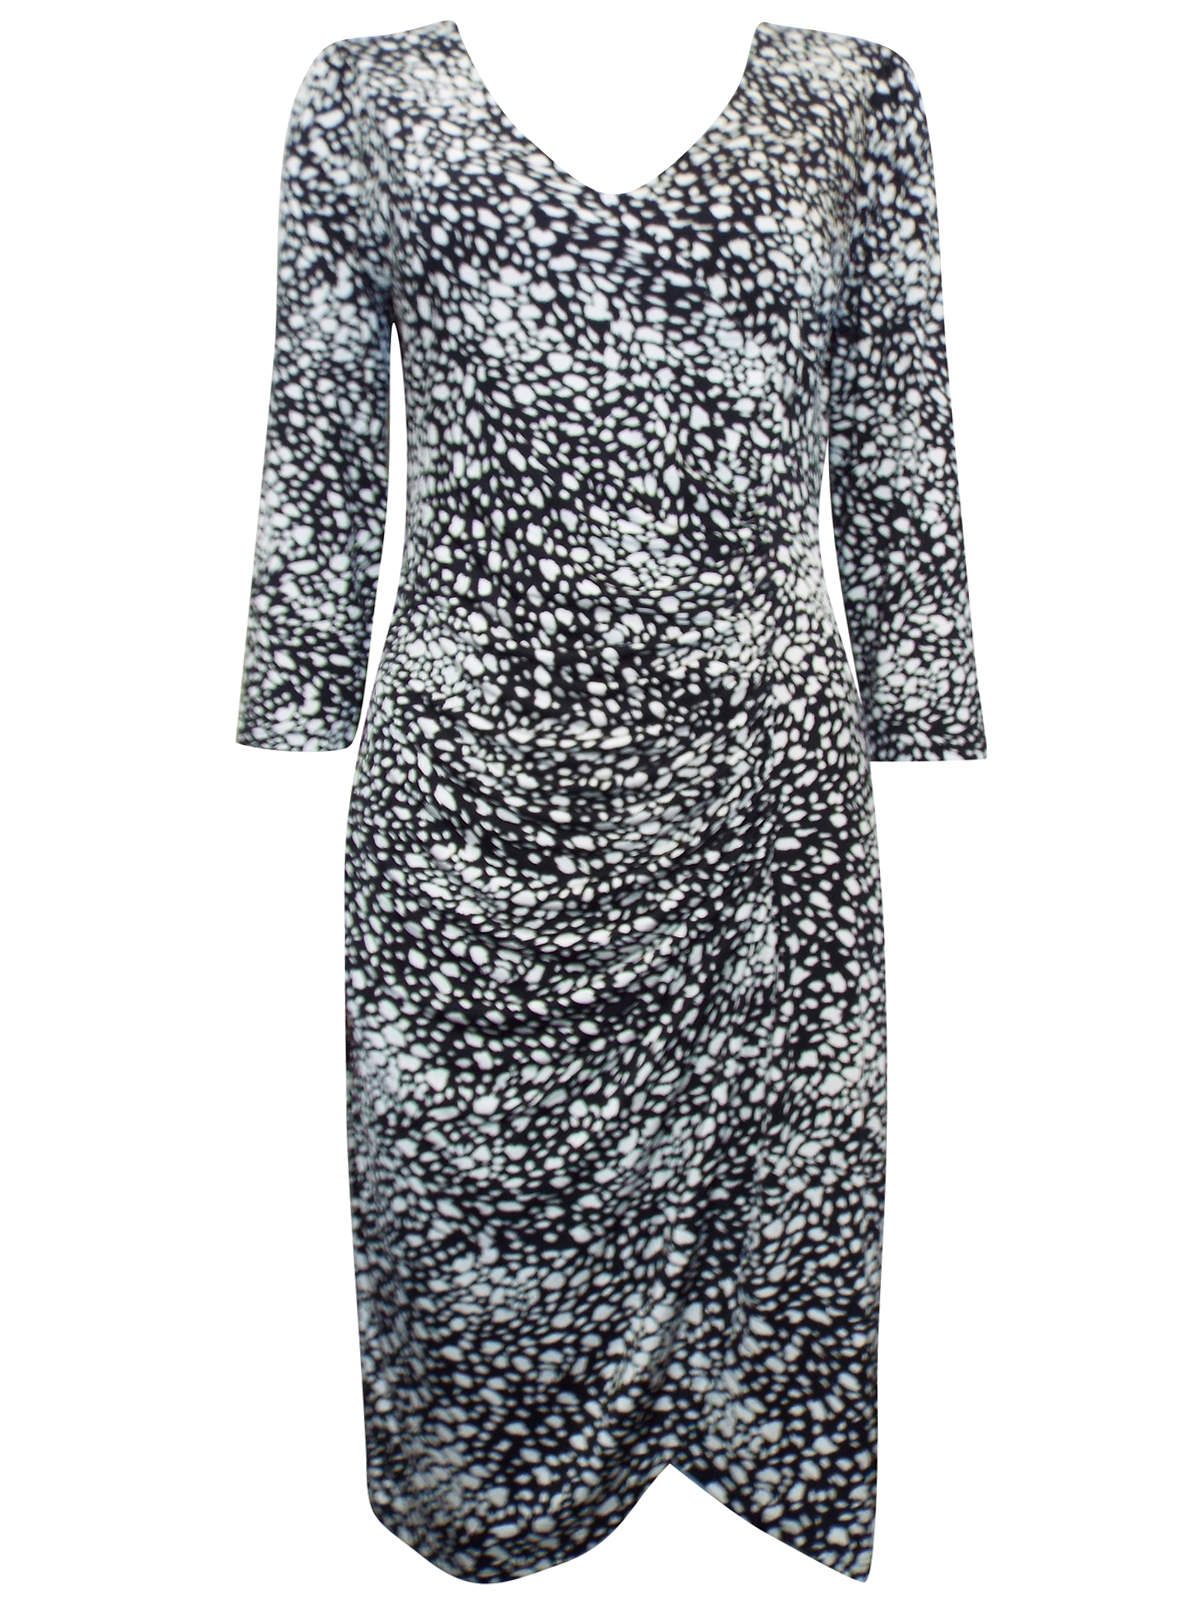 //text.. - - ASSORTED Ladies Plain & Printed Dresses - Size 10 to 18